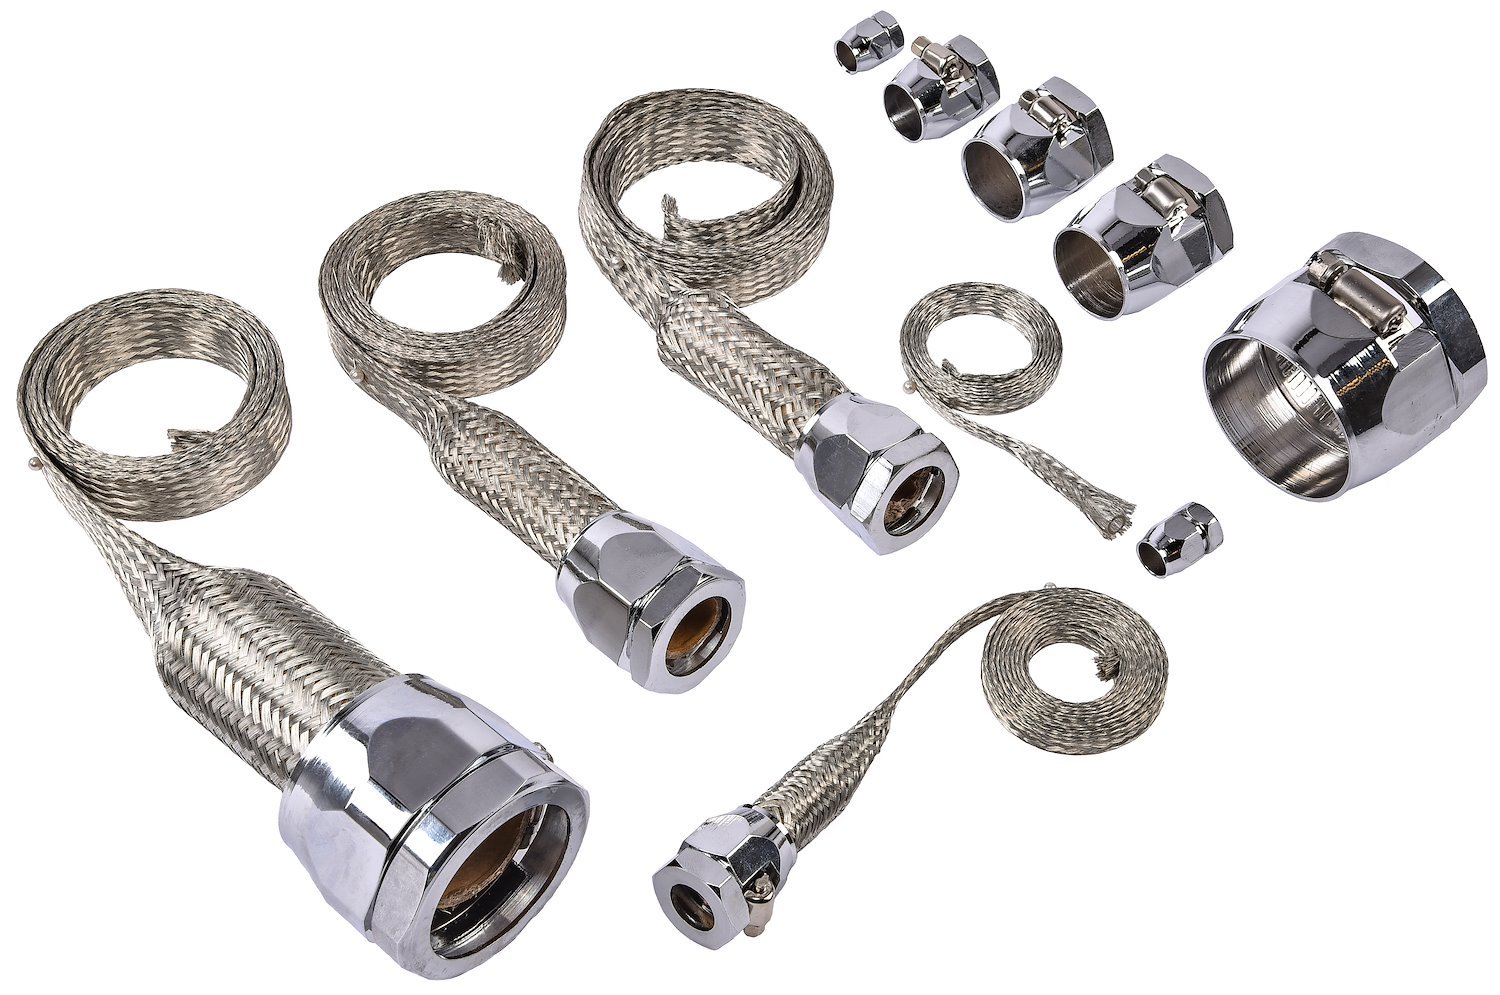 Braided Hose Sleeving Kit with Clamps [Chrome Hose